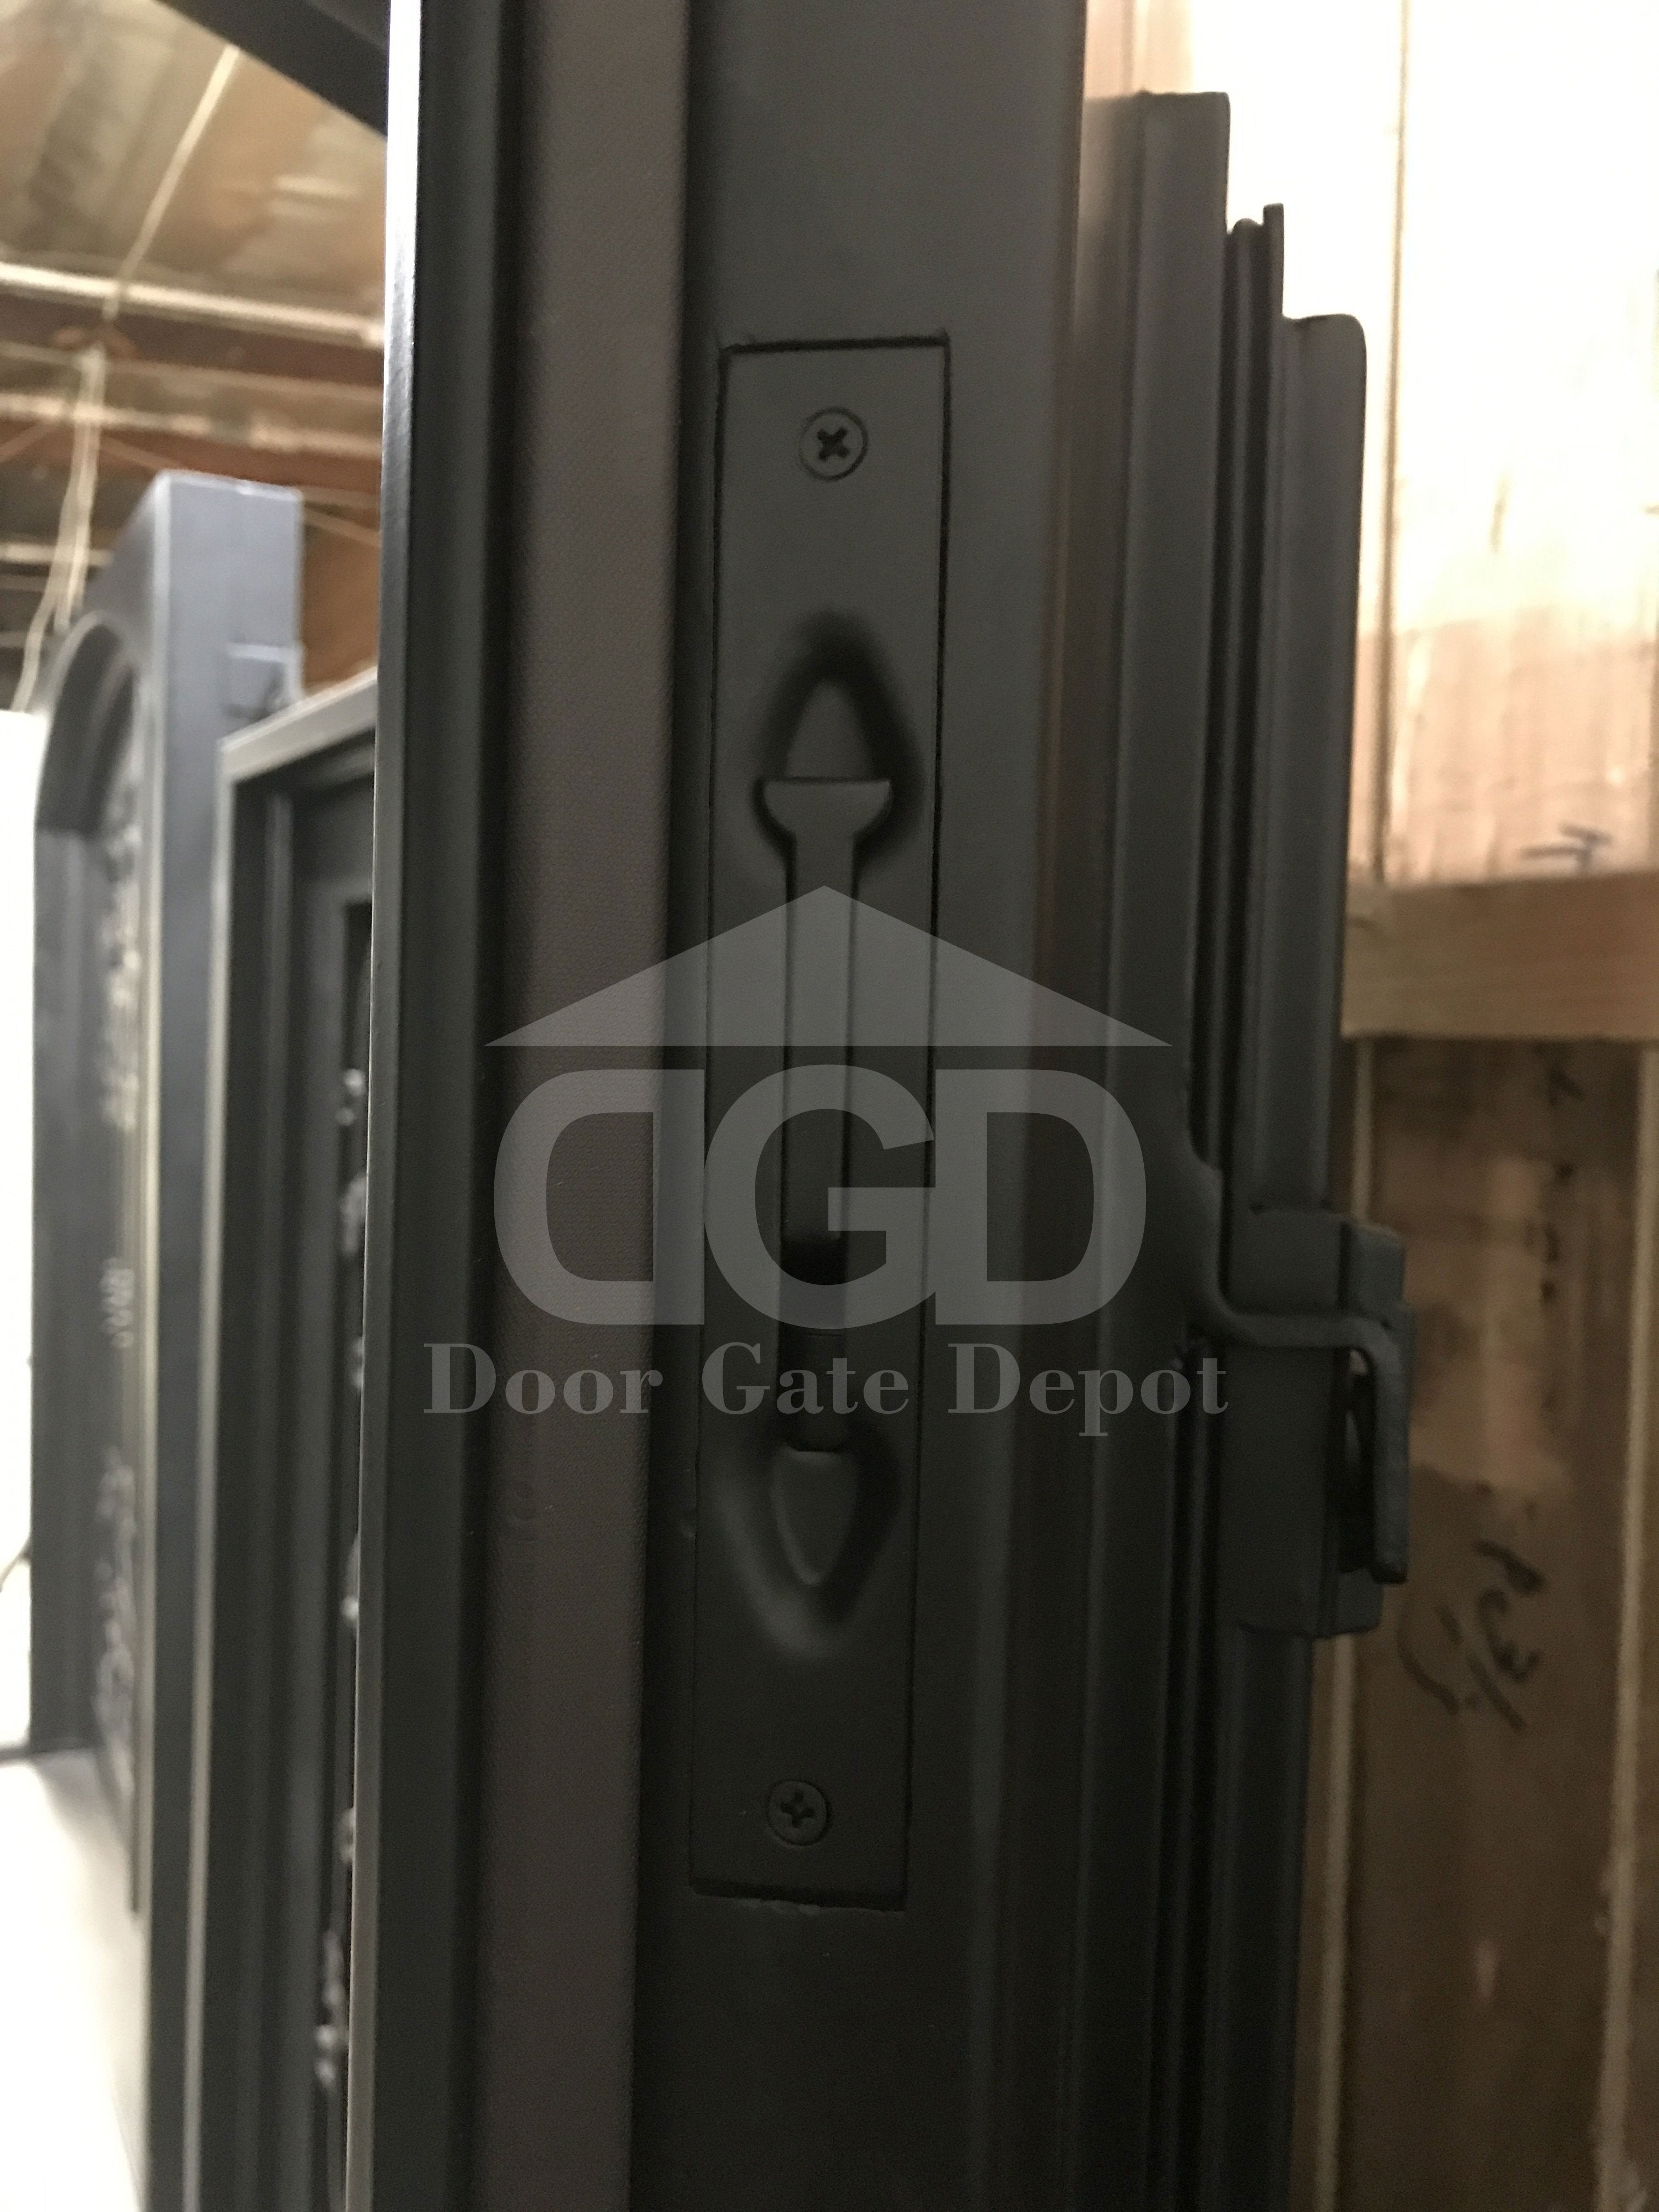 CARNATION- double arch top, tempered glass, bug screens, front entry wrought iron doors-62x96 Right Hand - Door Gate Depot